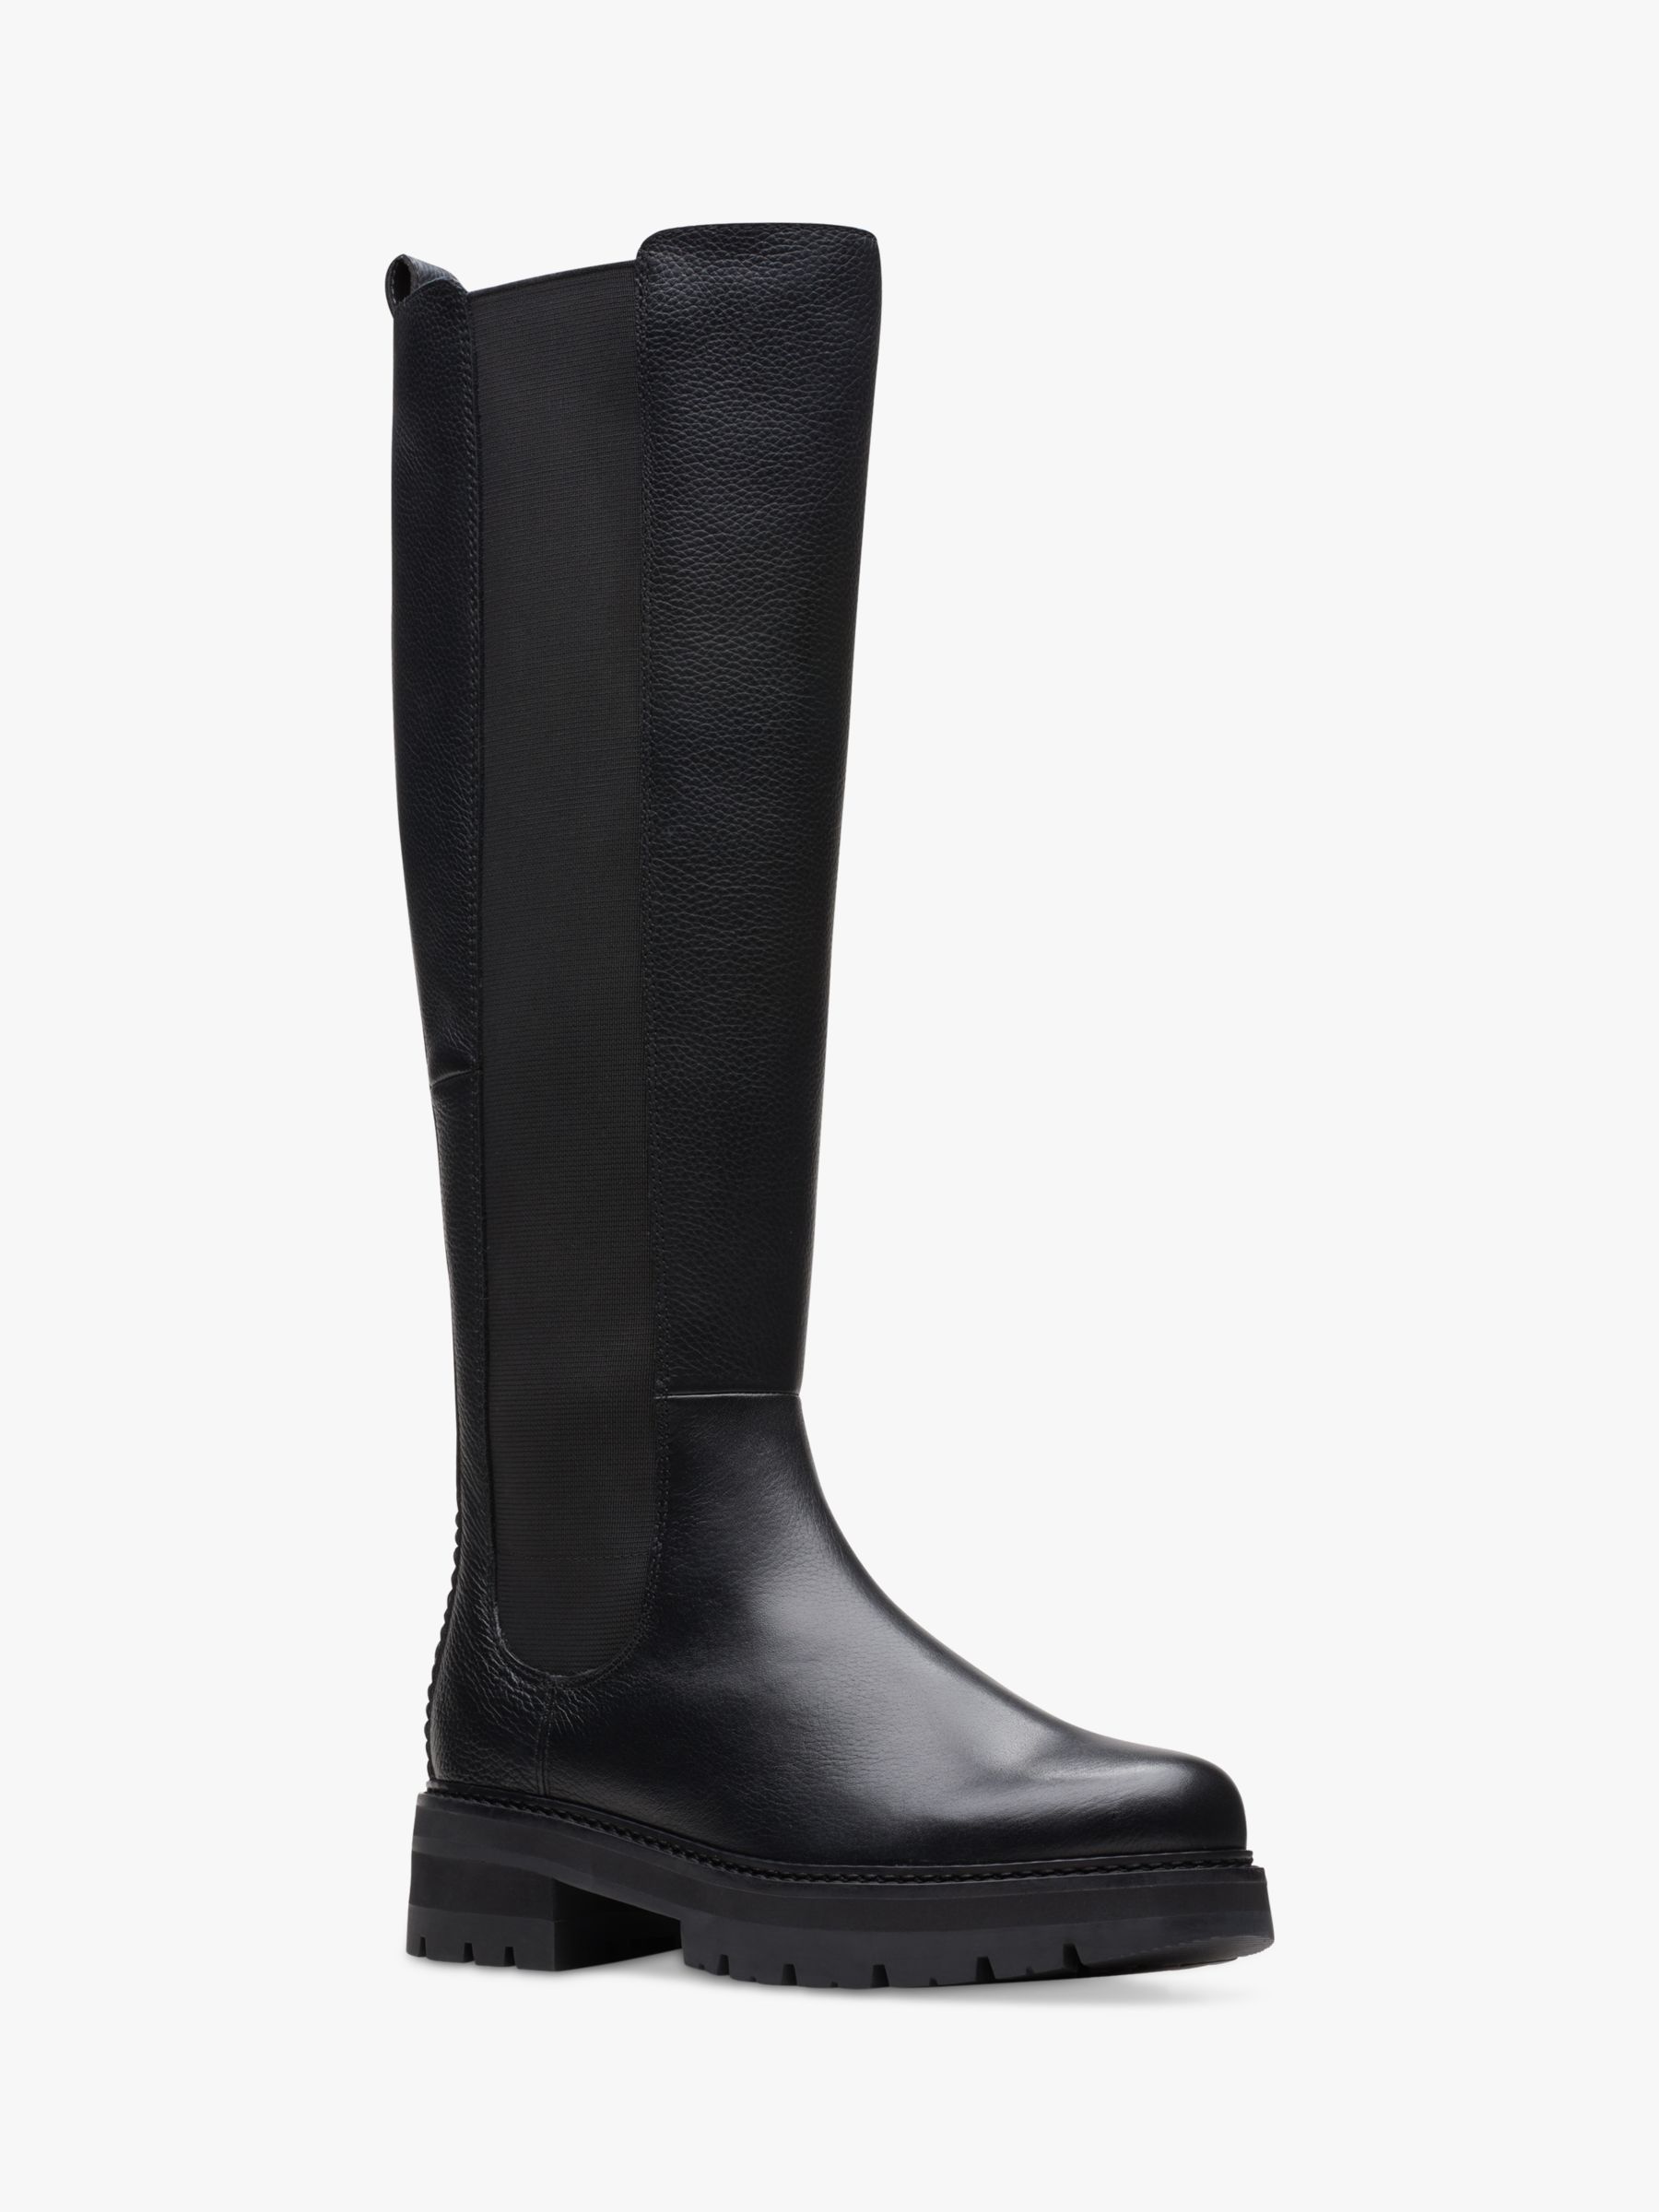 Clarks Orianna Leather Knee High Boots, Black at John Lewis Partners